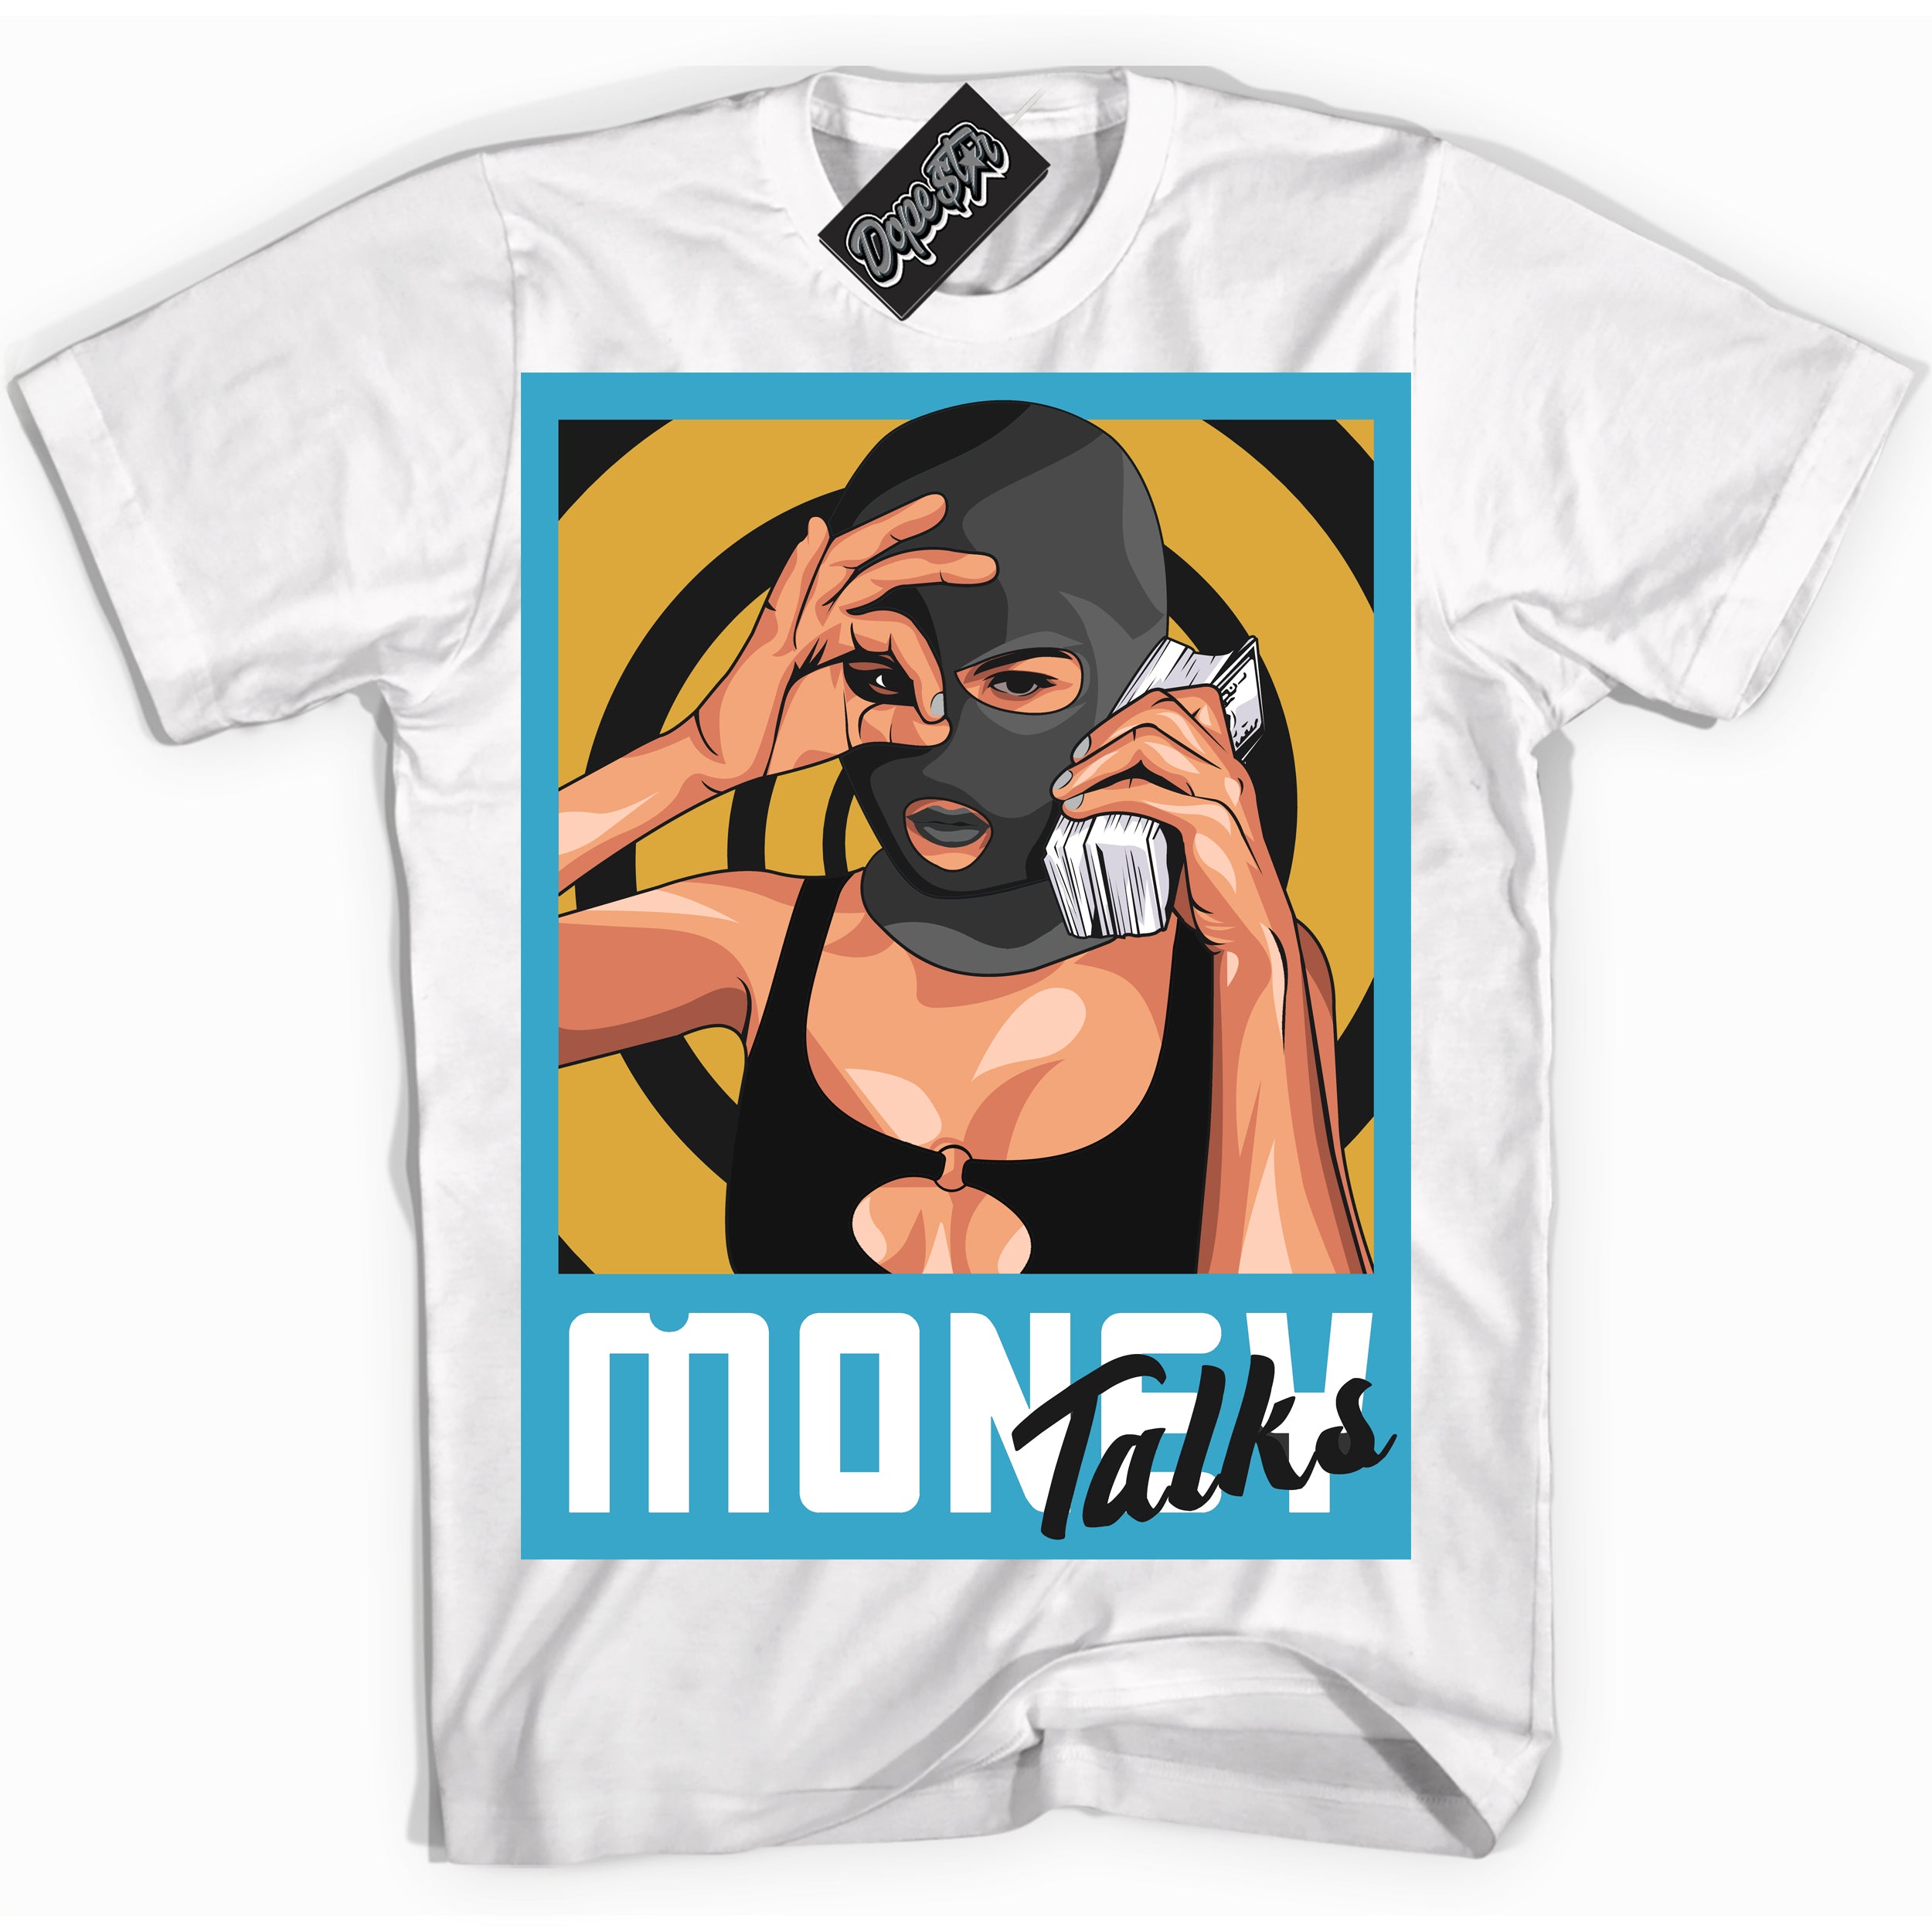 Cool White Shirt with “ Money Talks” design that perfectly matches Aqua 5s Sneakers.